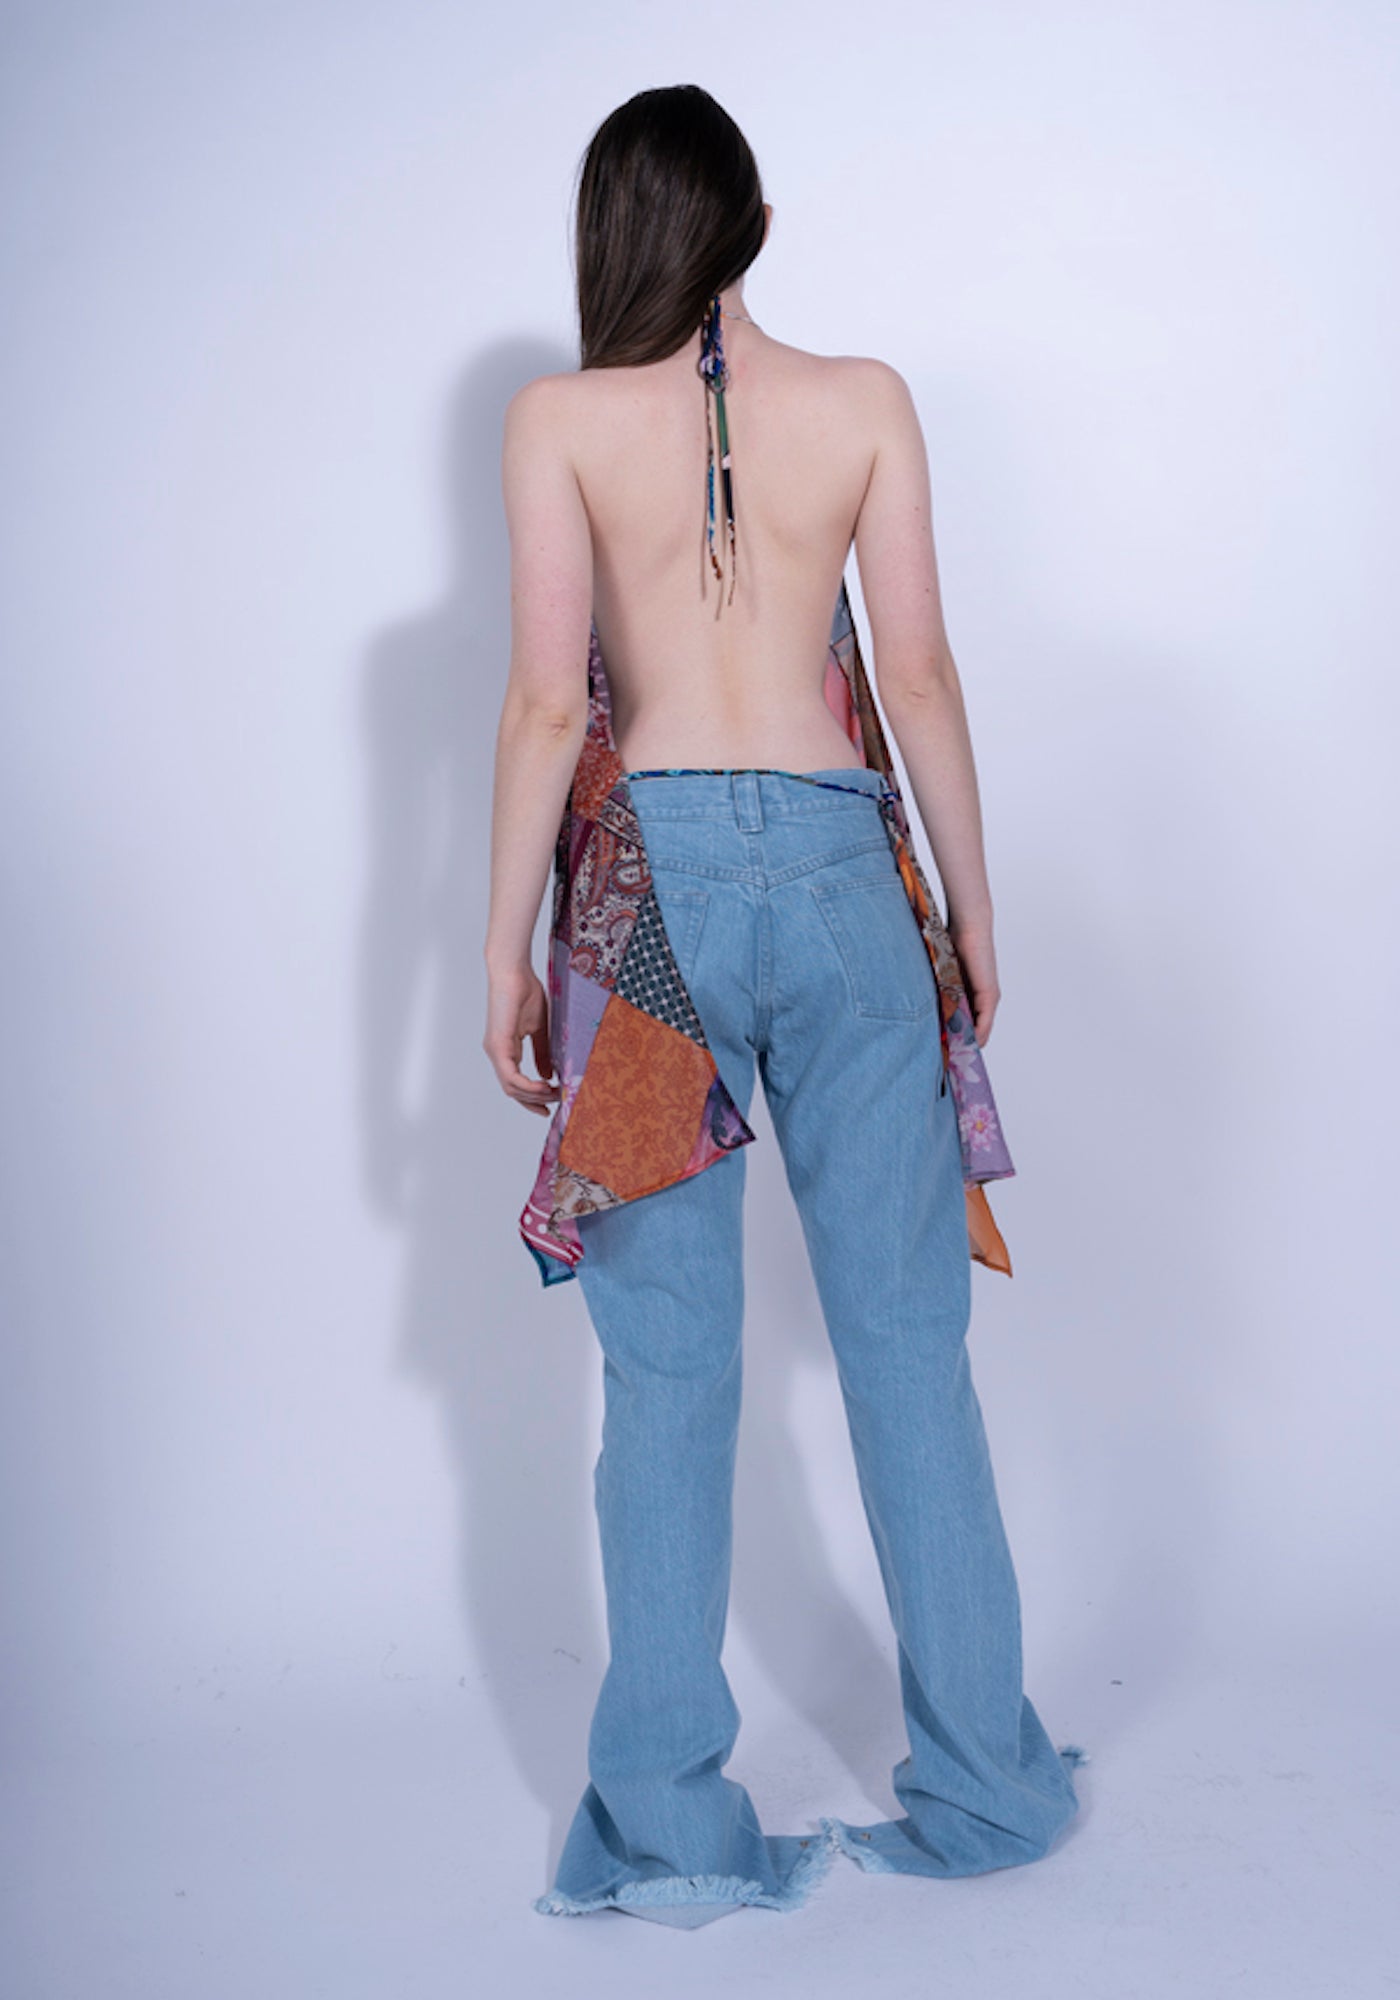 SLANTED CROTCH JEANS IN LIGHT BLUE